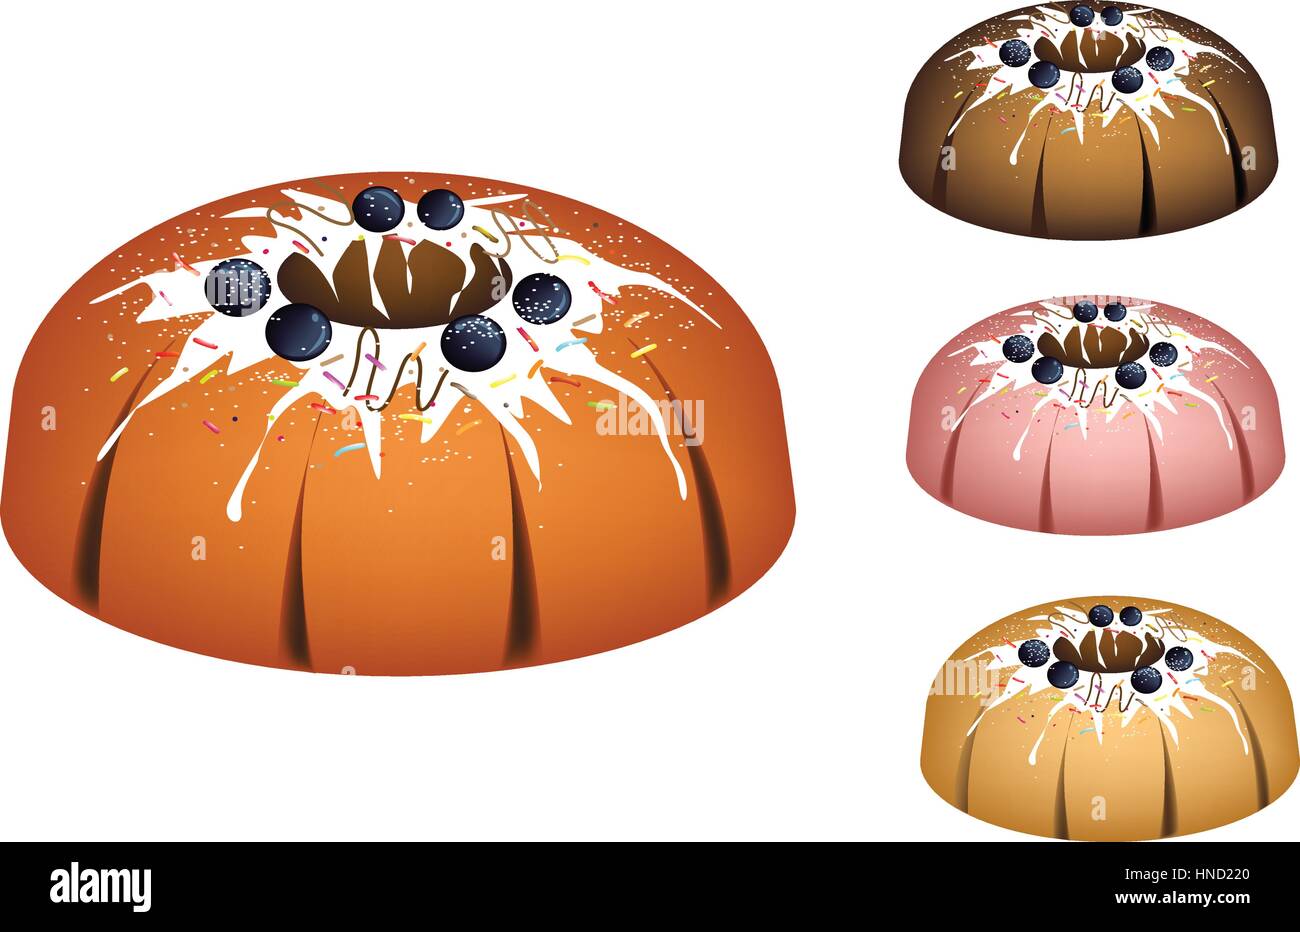 Illustration Set of Bundt Cake or Traditional Big Round Cake with Hole Inside, Mirror Glaze Coating, Blueberry and Chocolate Sprinkles for Holiday Des Stock Vector